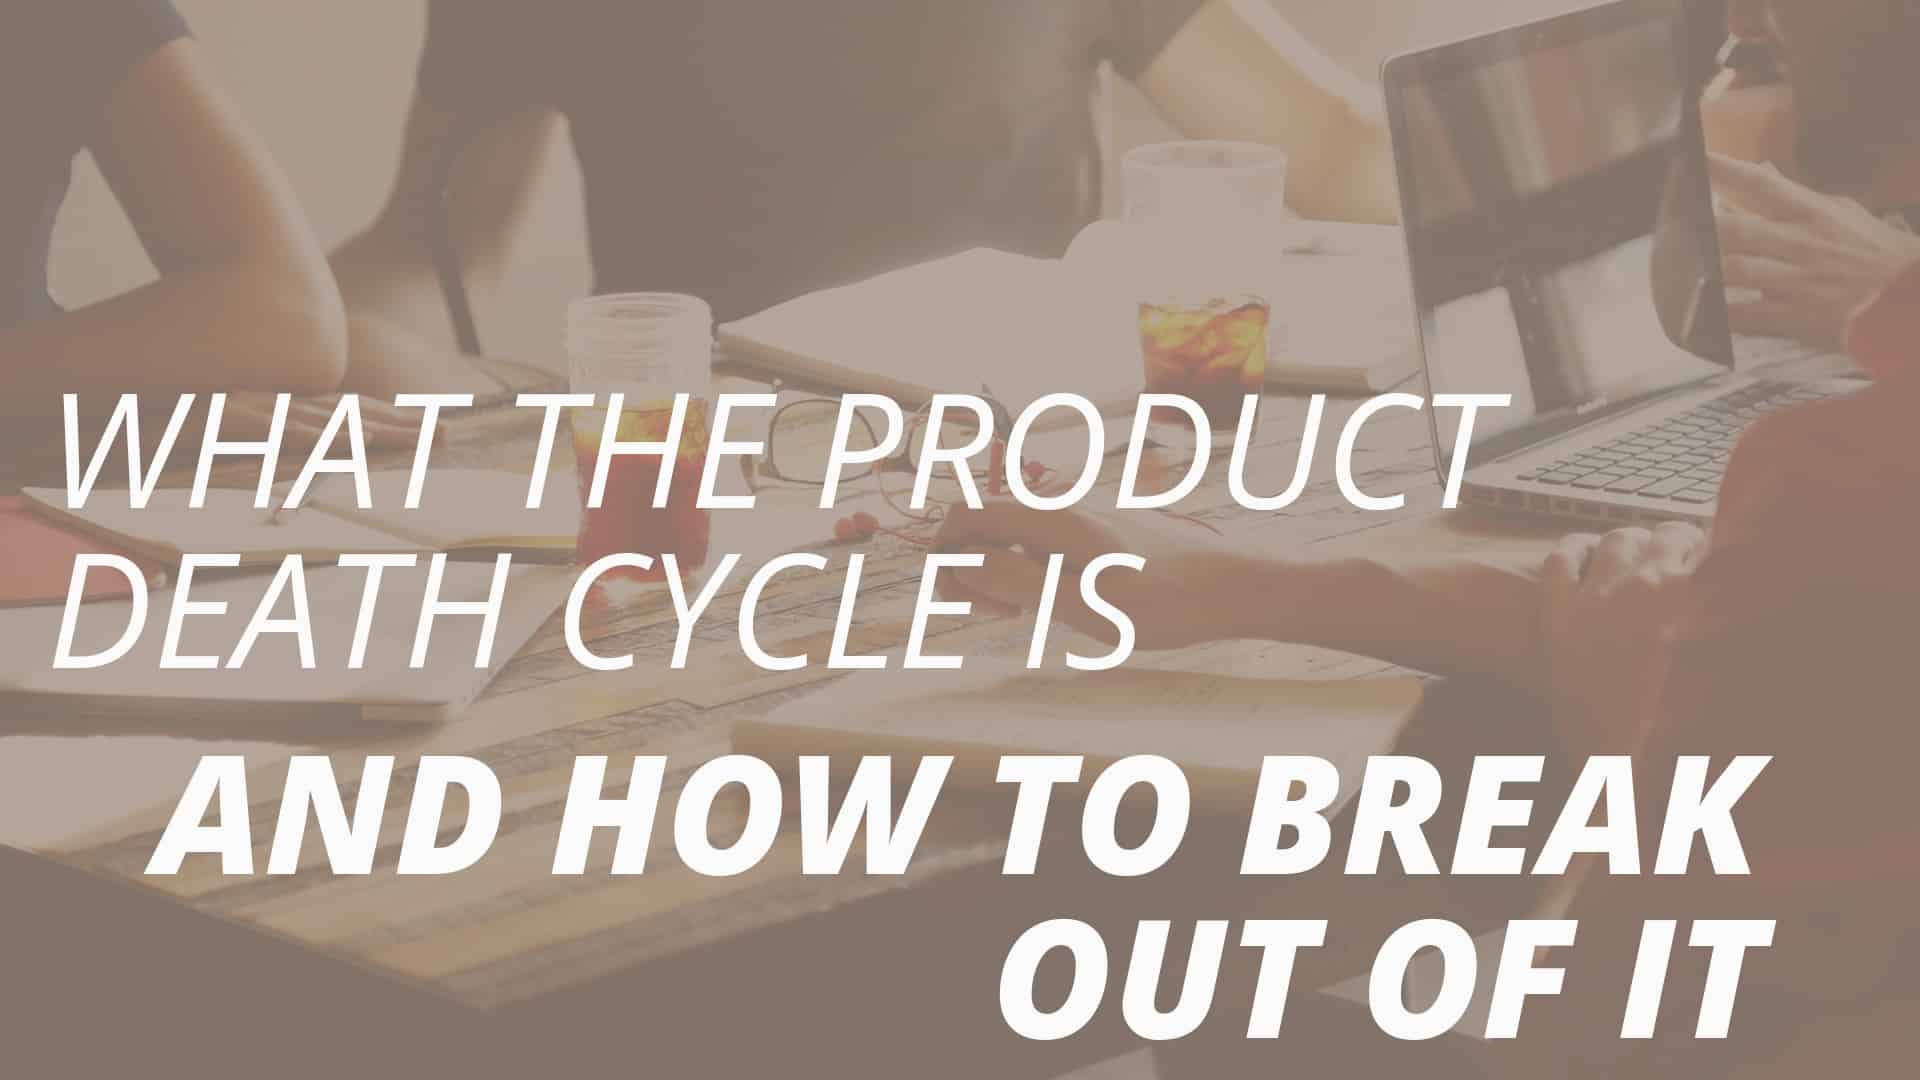 What the Product Death Cycle Is and How to Break Out Of It